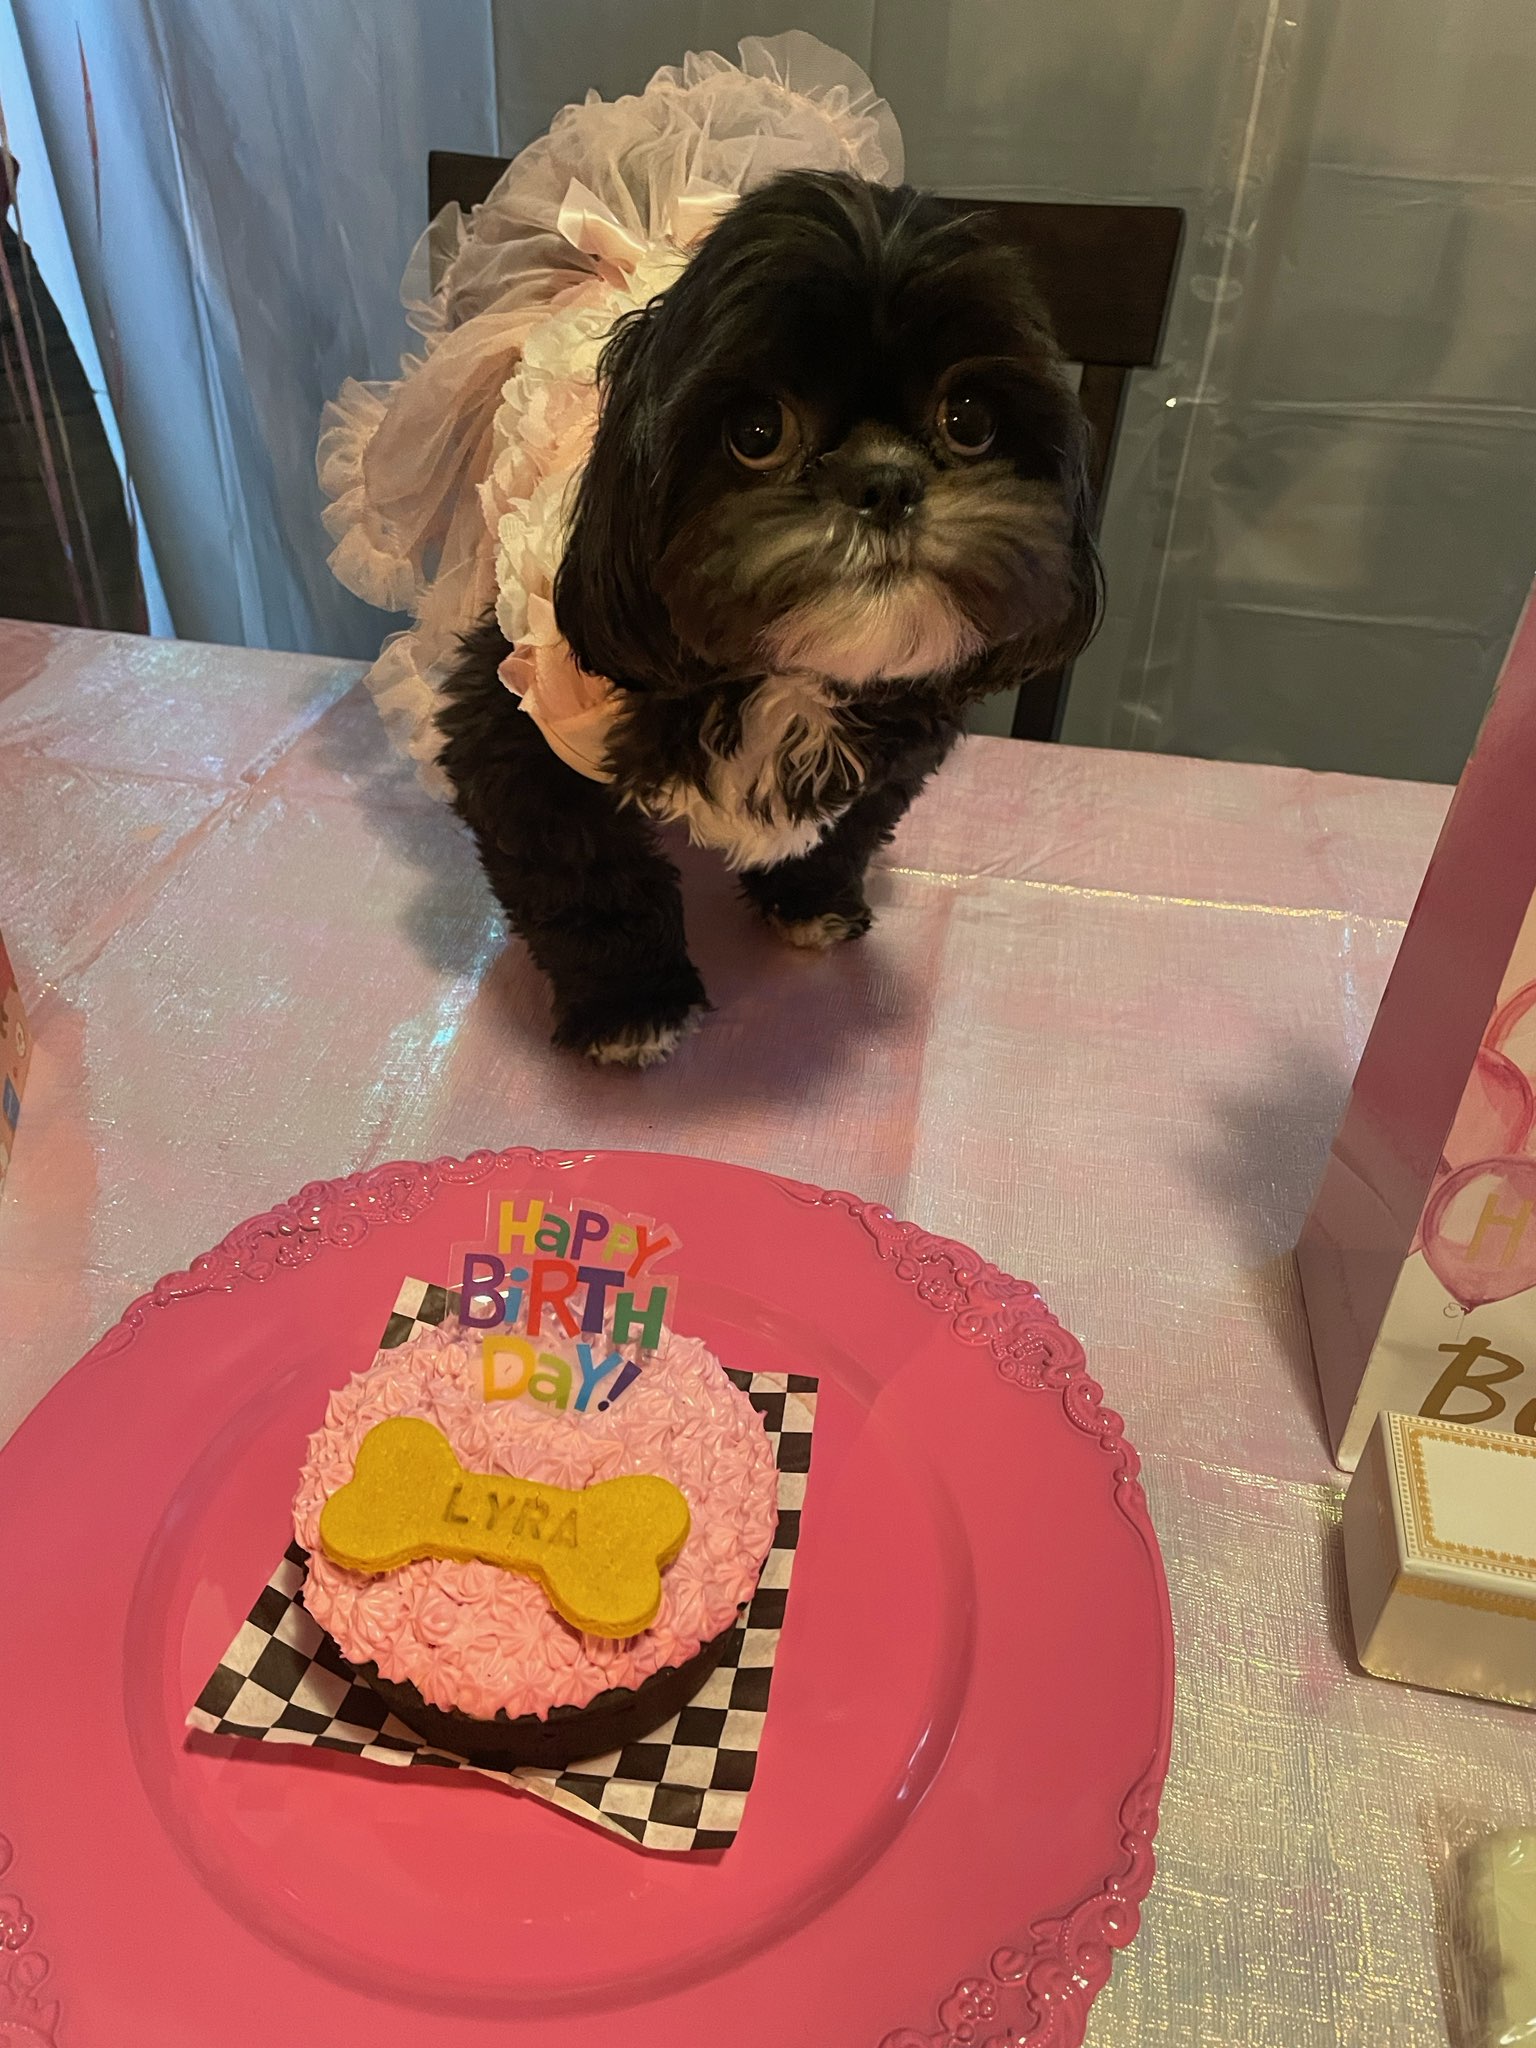 A Shih Tzu dog is at the table set for a birthday party